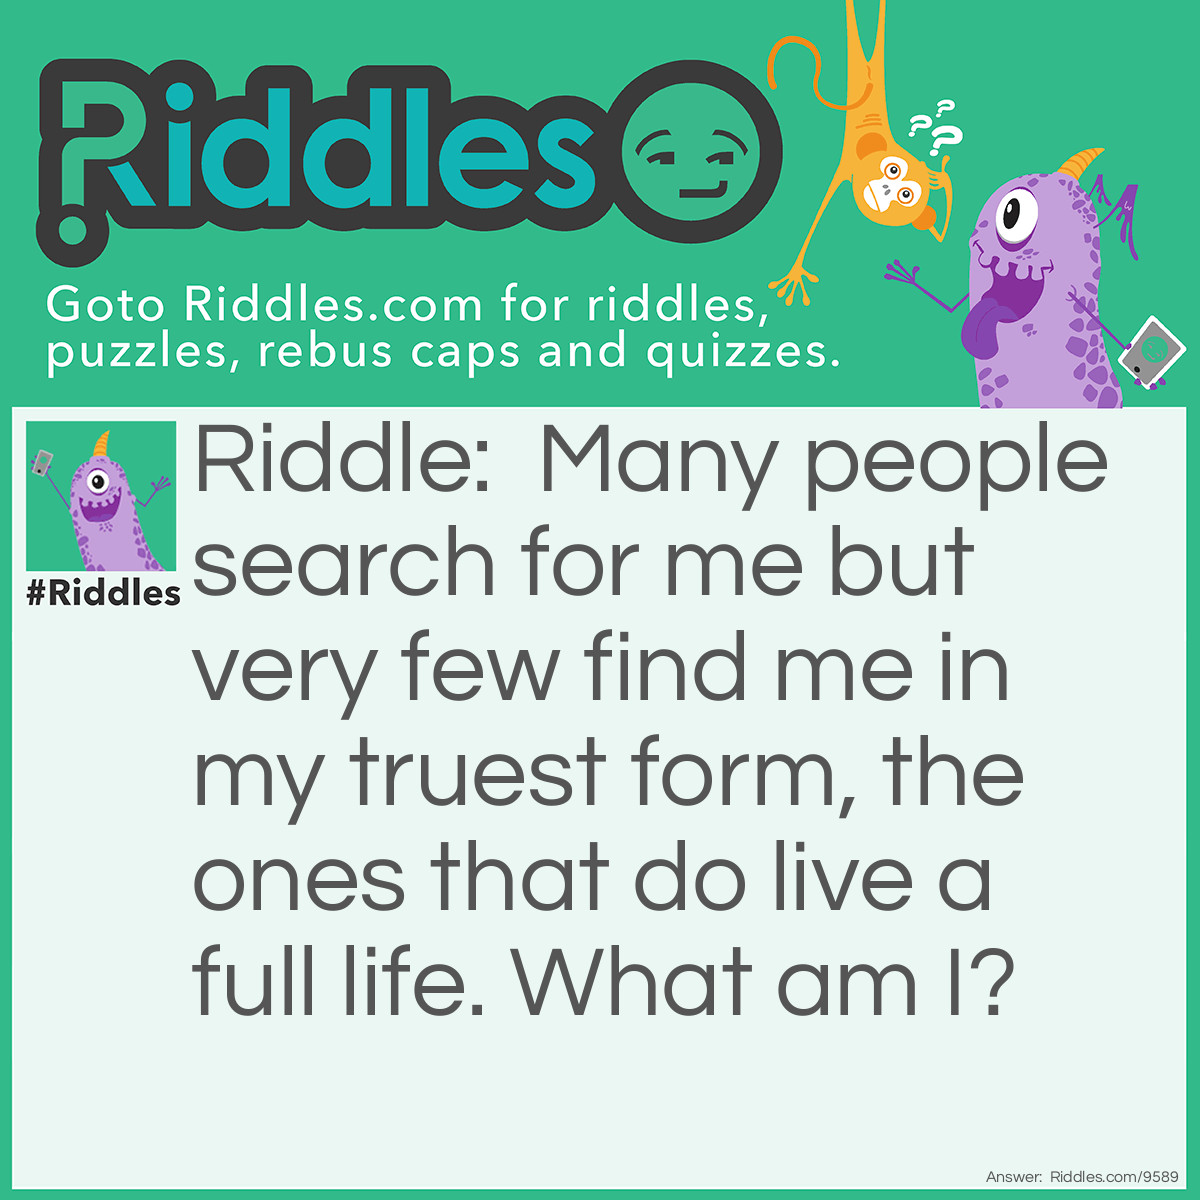 Riddle: Many people search for me but very few find me in my truest form, the ones that do live a full life. What am I? Answer: Happiness.